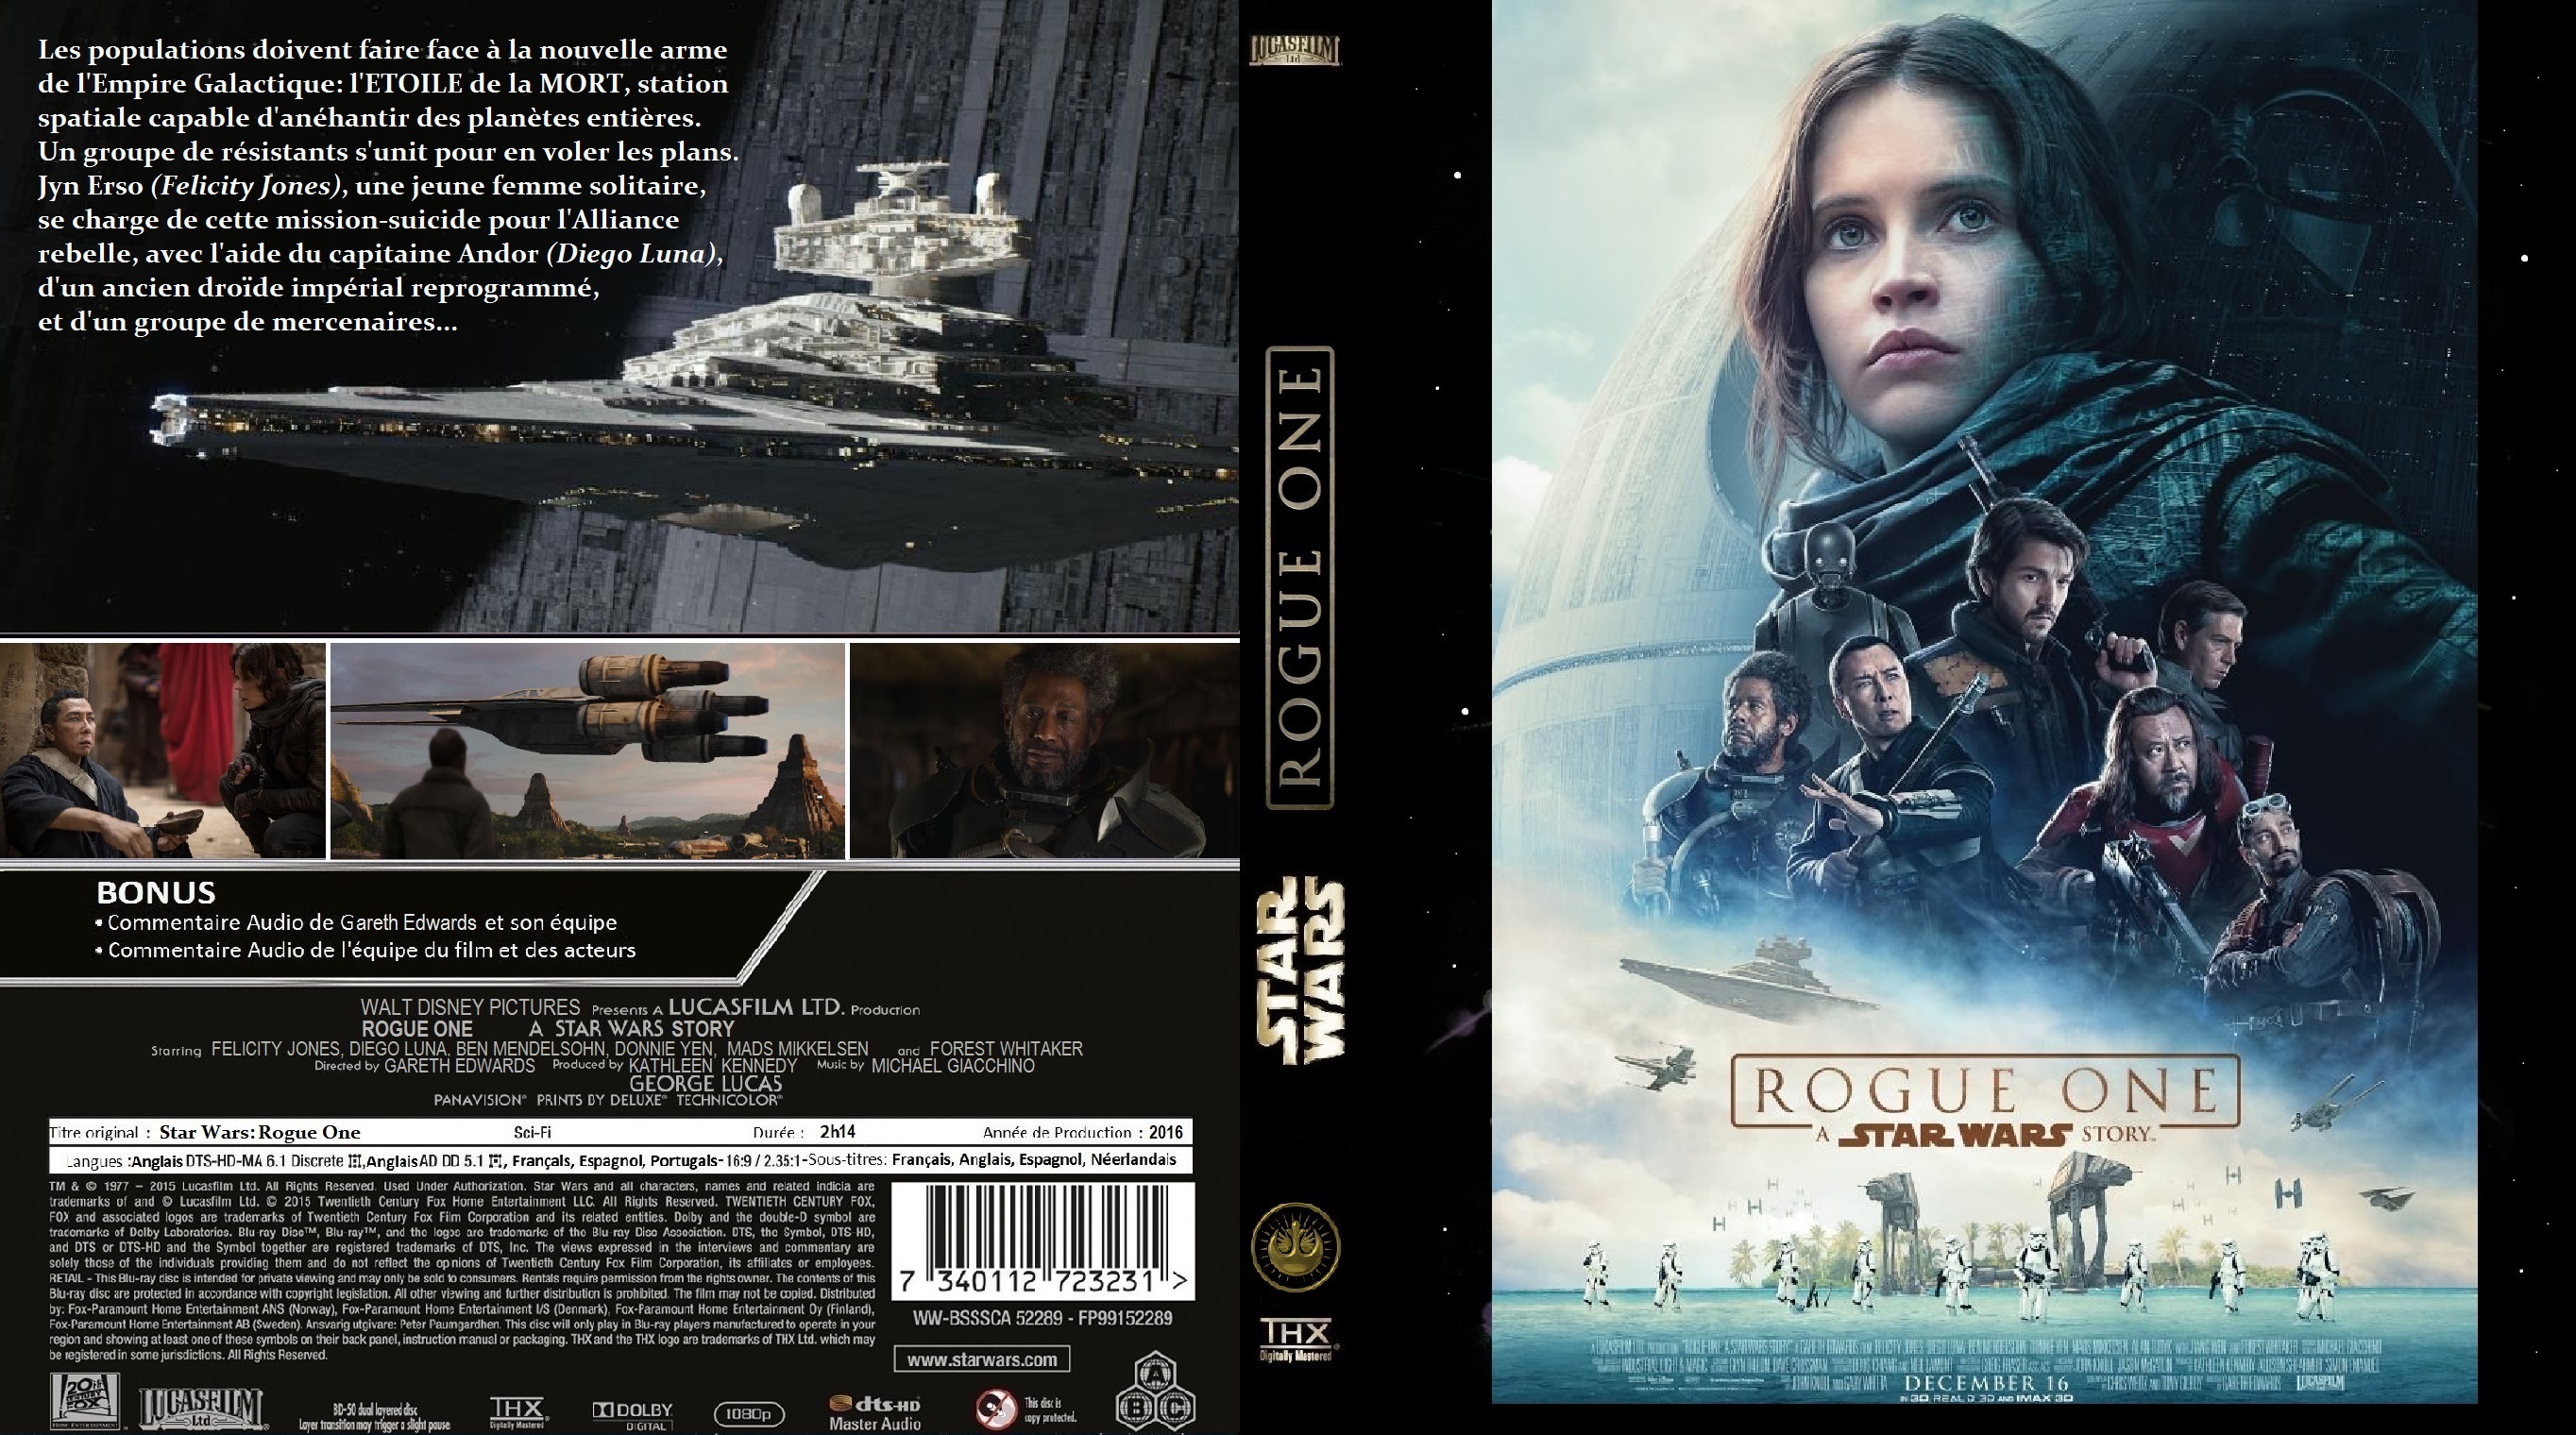 Jaquette DVD Rogue One: A Star Wars Story custom (BLU-RAY)